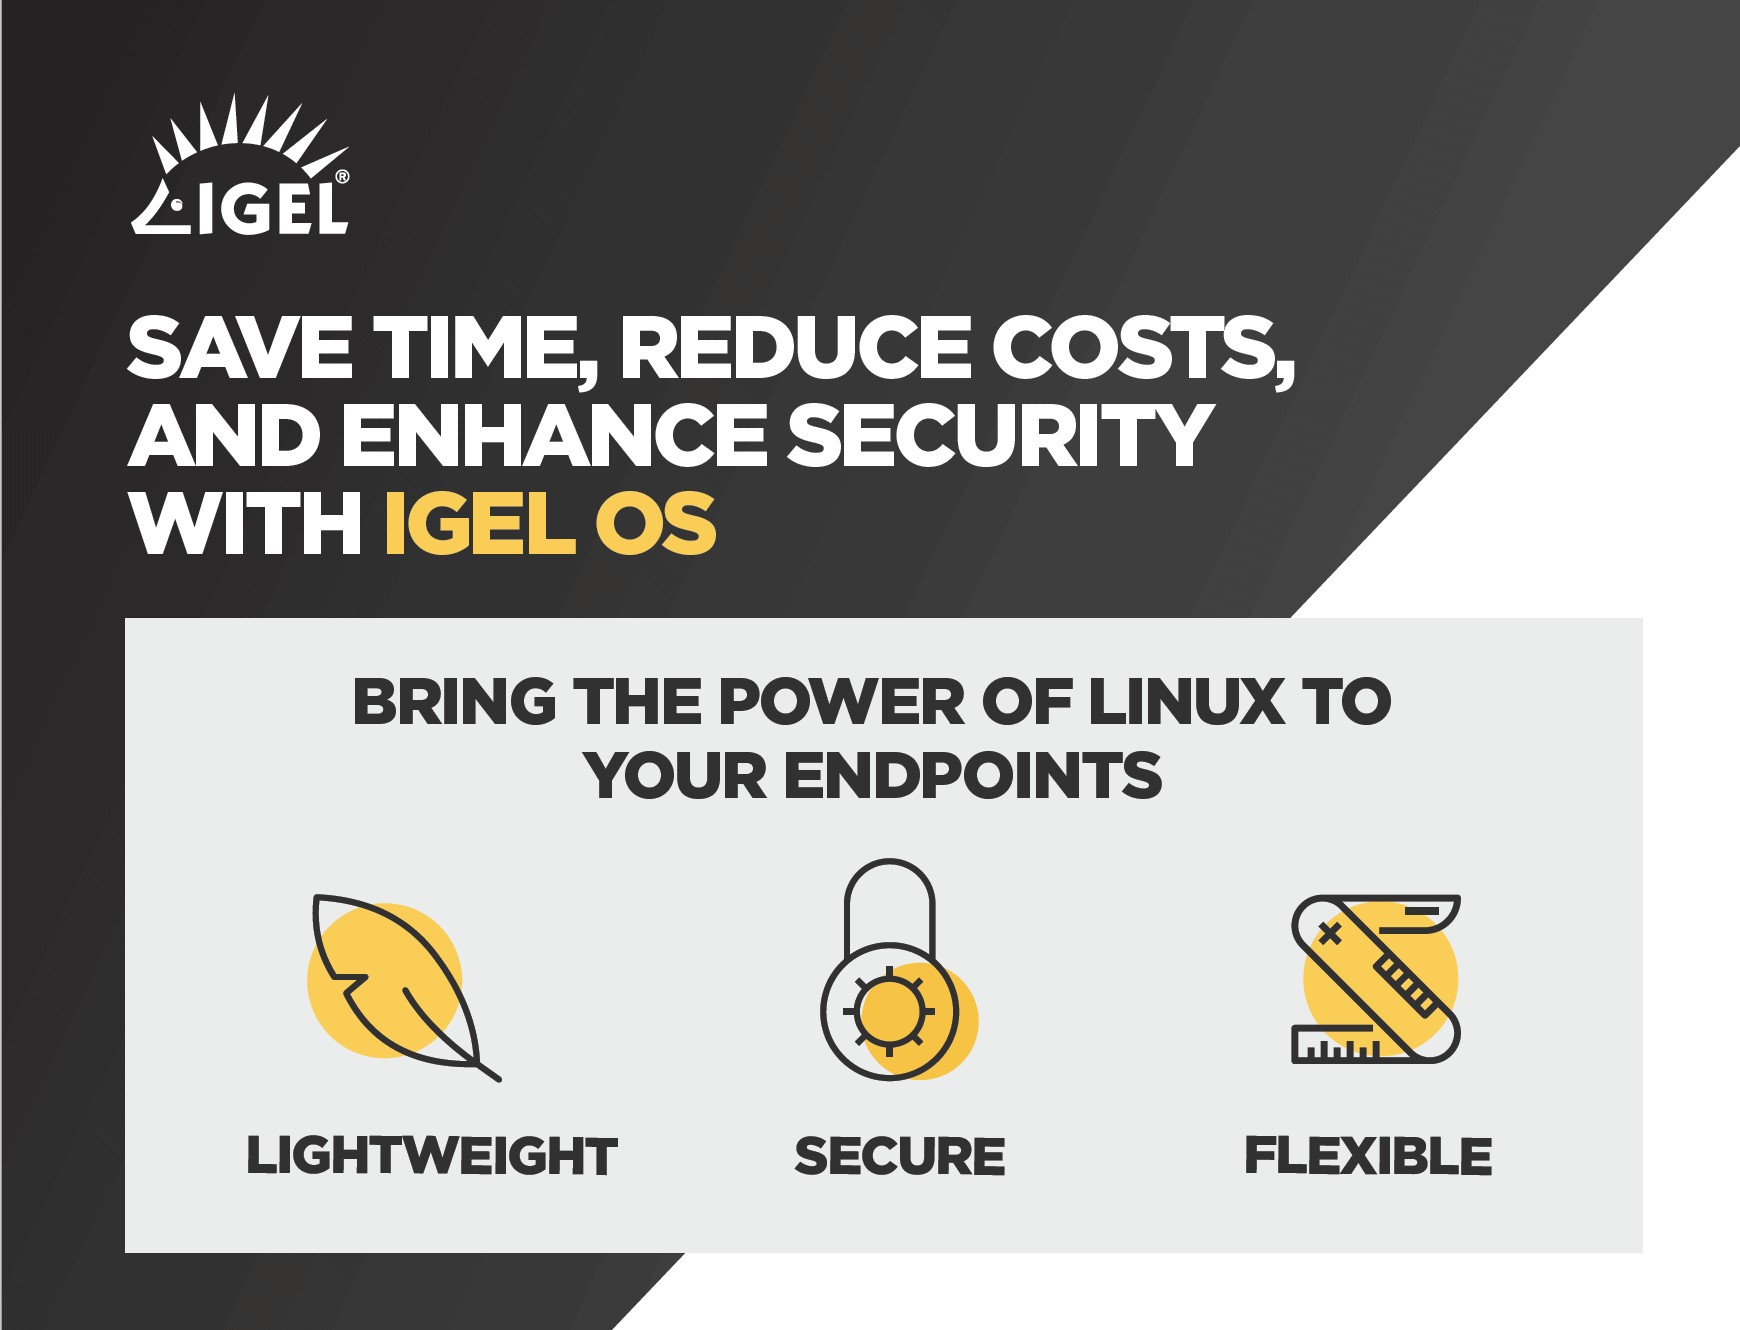 Save Time, Reduce Costs, and Enhance Security with IGEL OS